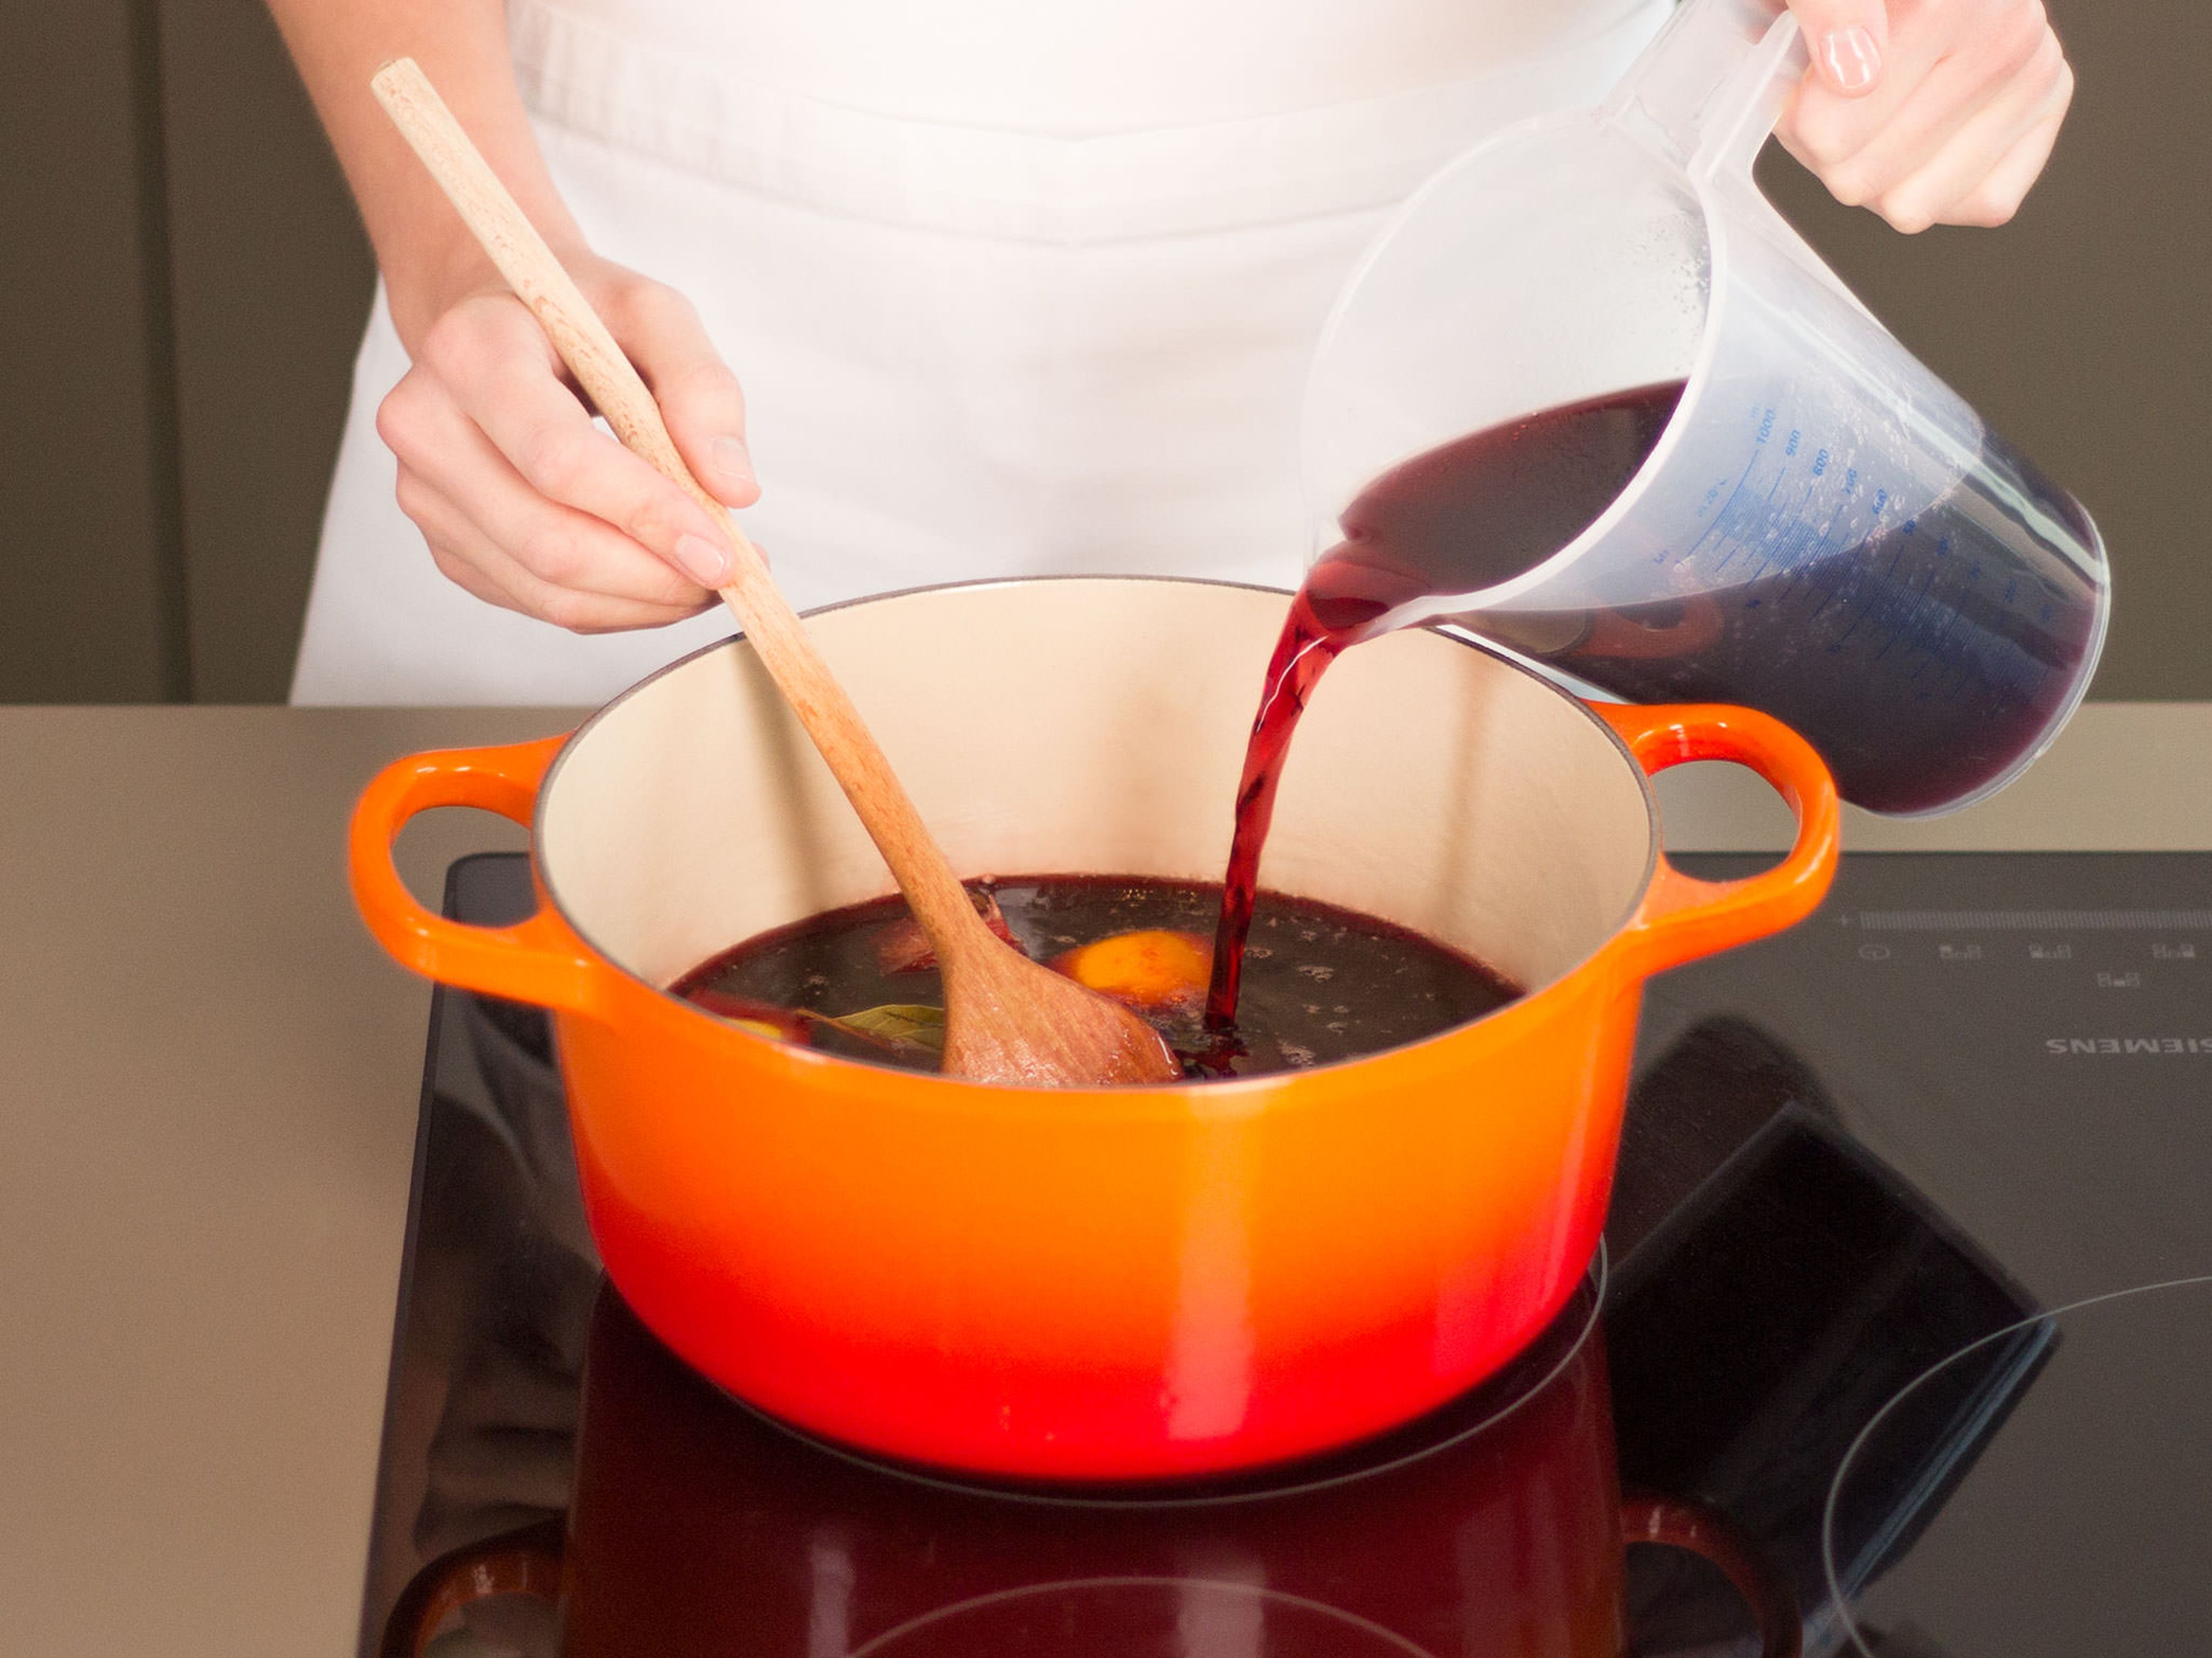 Add red wine, gently warming it up for approx. 5 min. Do not boil, as this would burn off the alcohol in the wine.